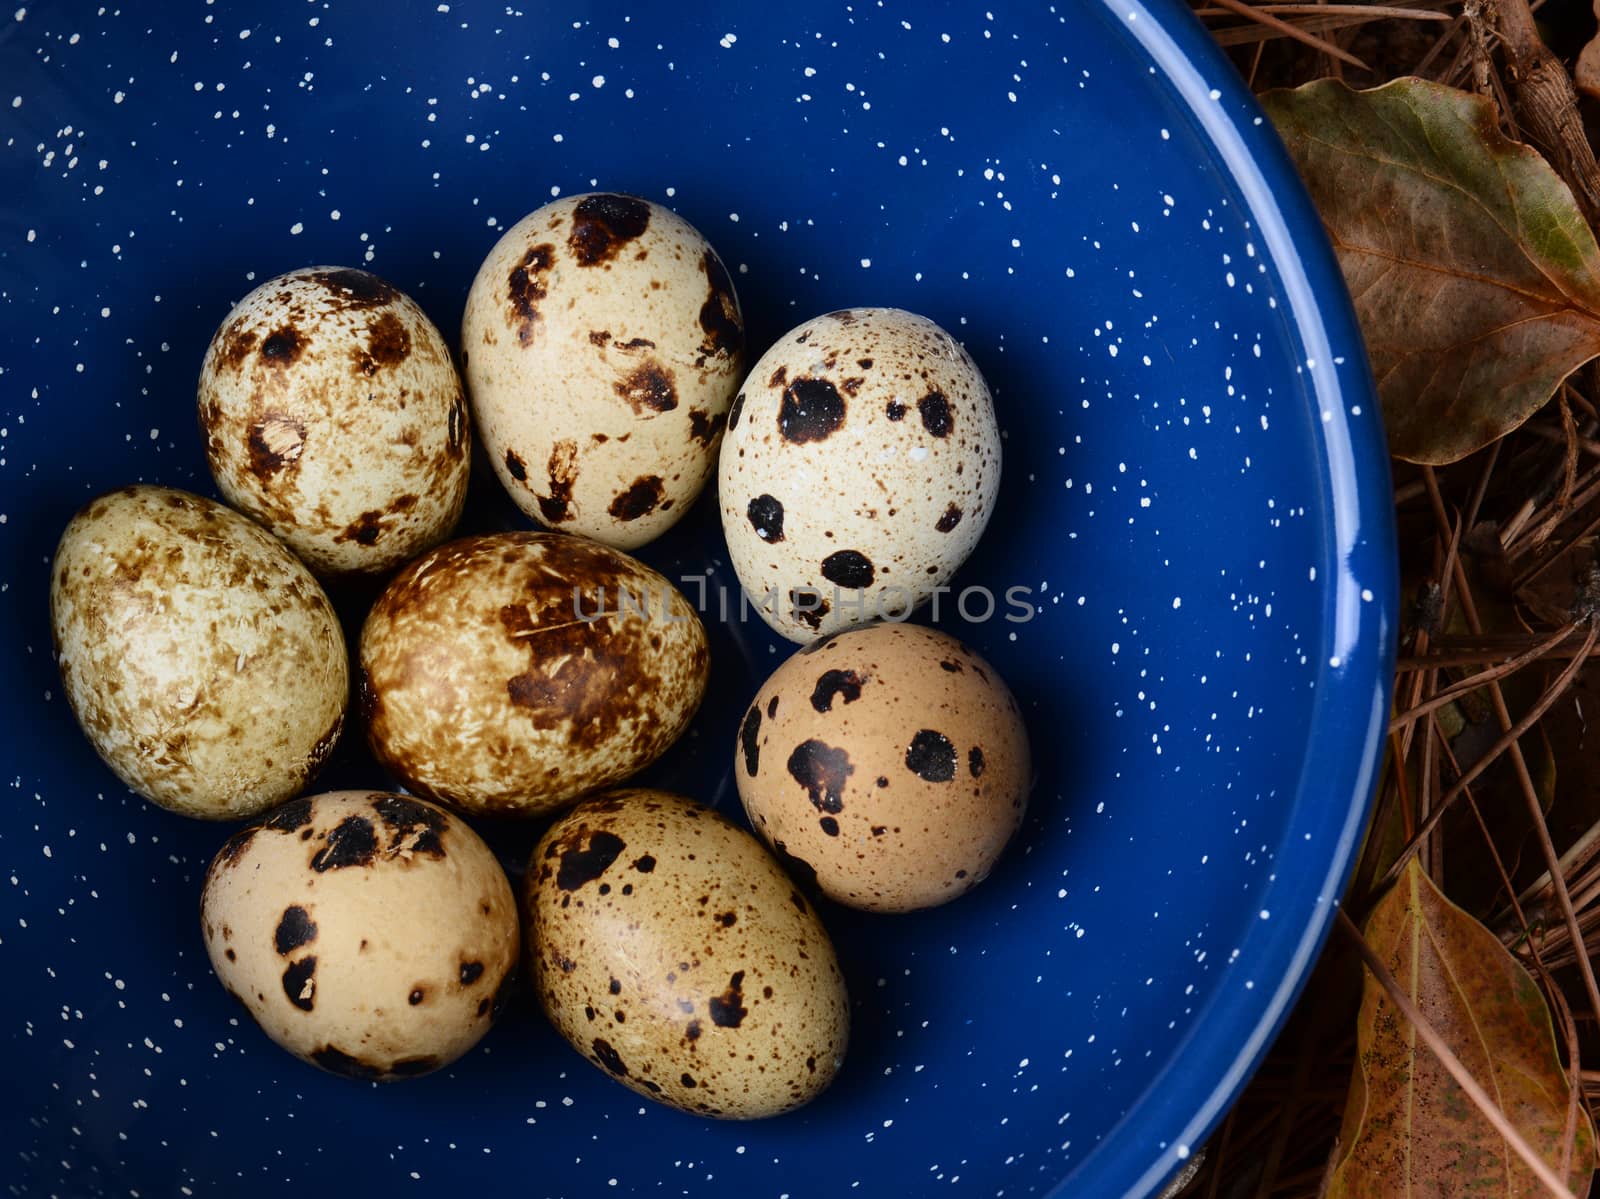 High angle view of a bowl filled with Quail eggs. The blue camping plate is amongst pine needles and leaves on a forest floor.